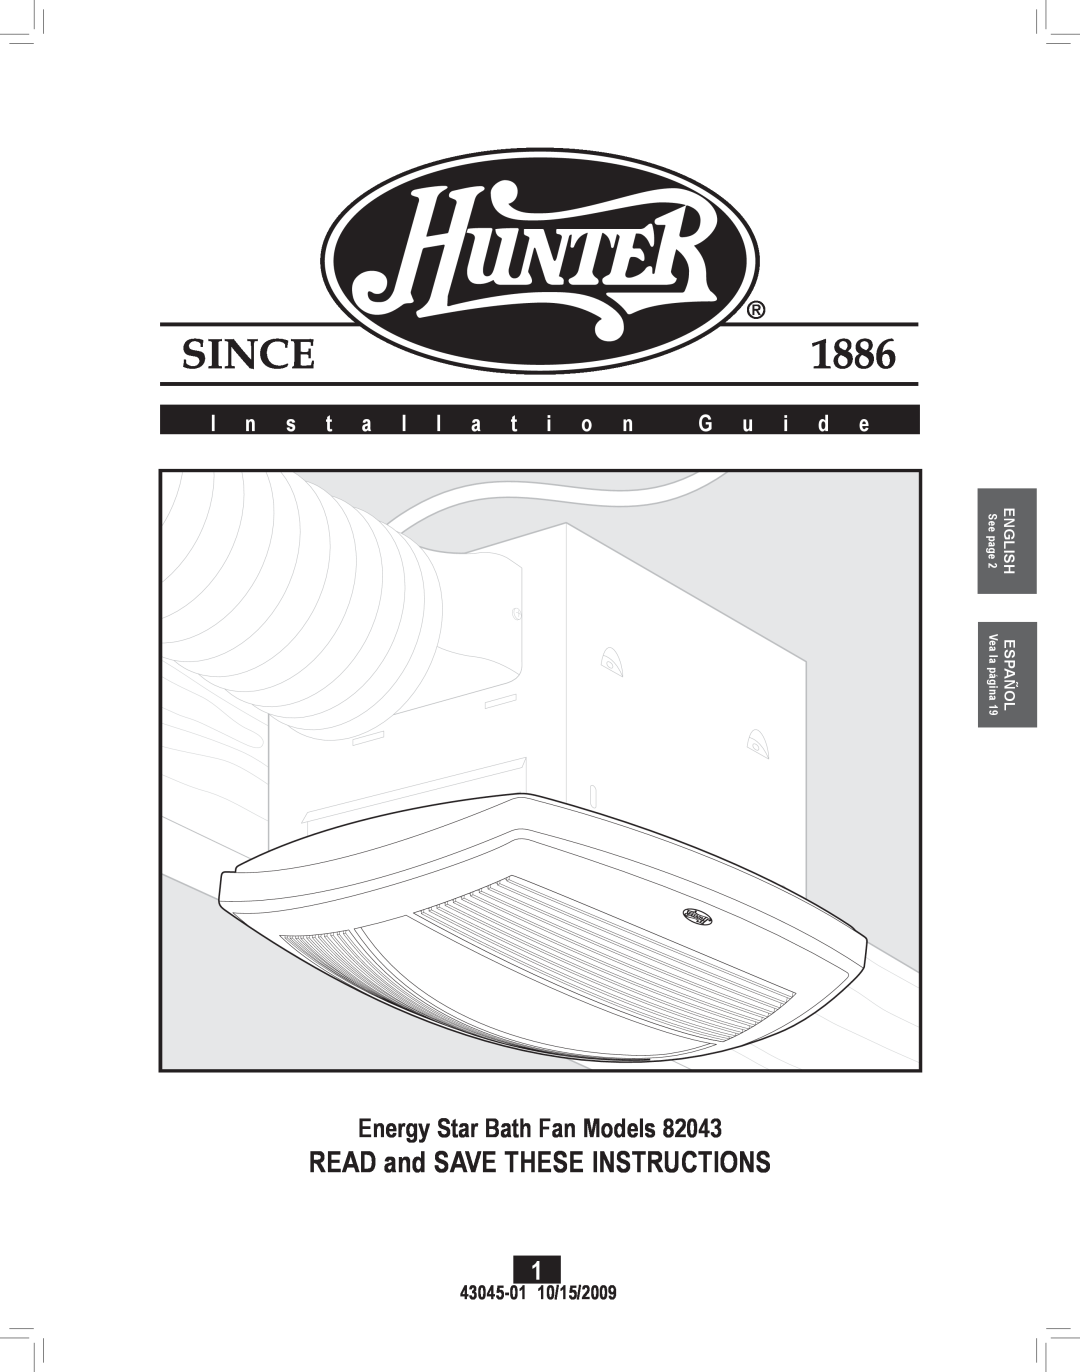 Hunter Fan 82043, 43045 manual READ and SAVE THESE INSTRUCTIONS, Energy Star Bath Fan Models 